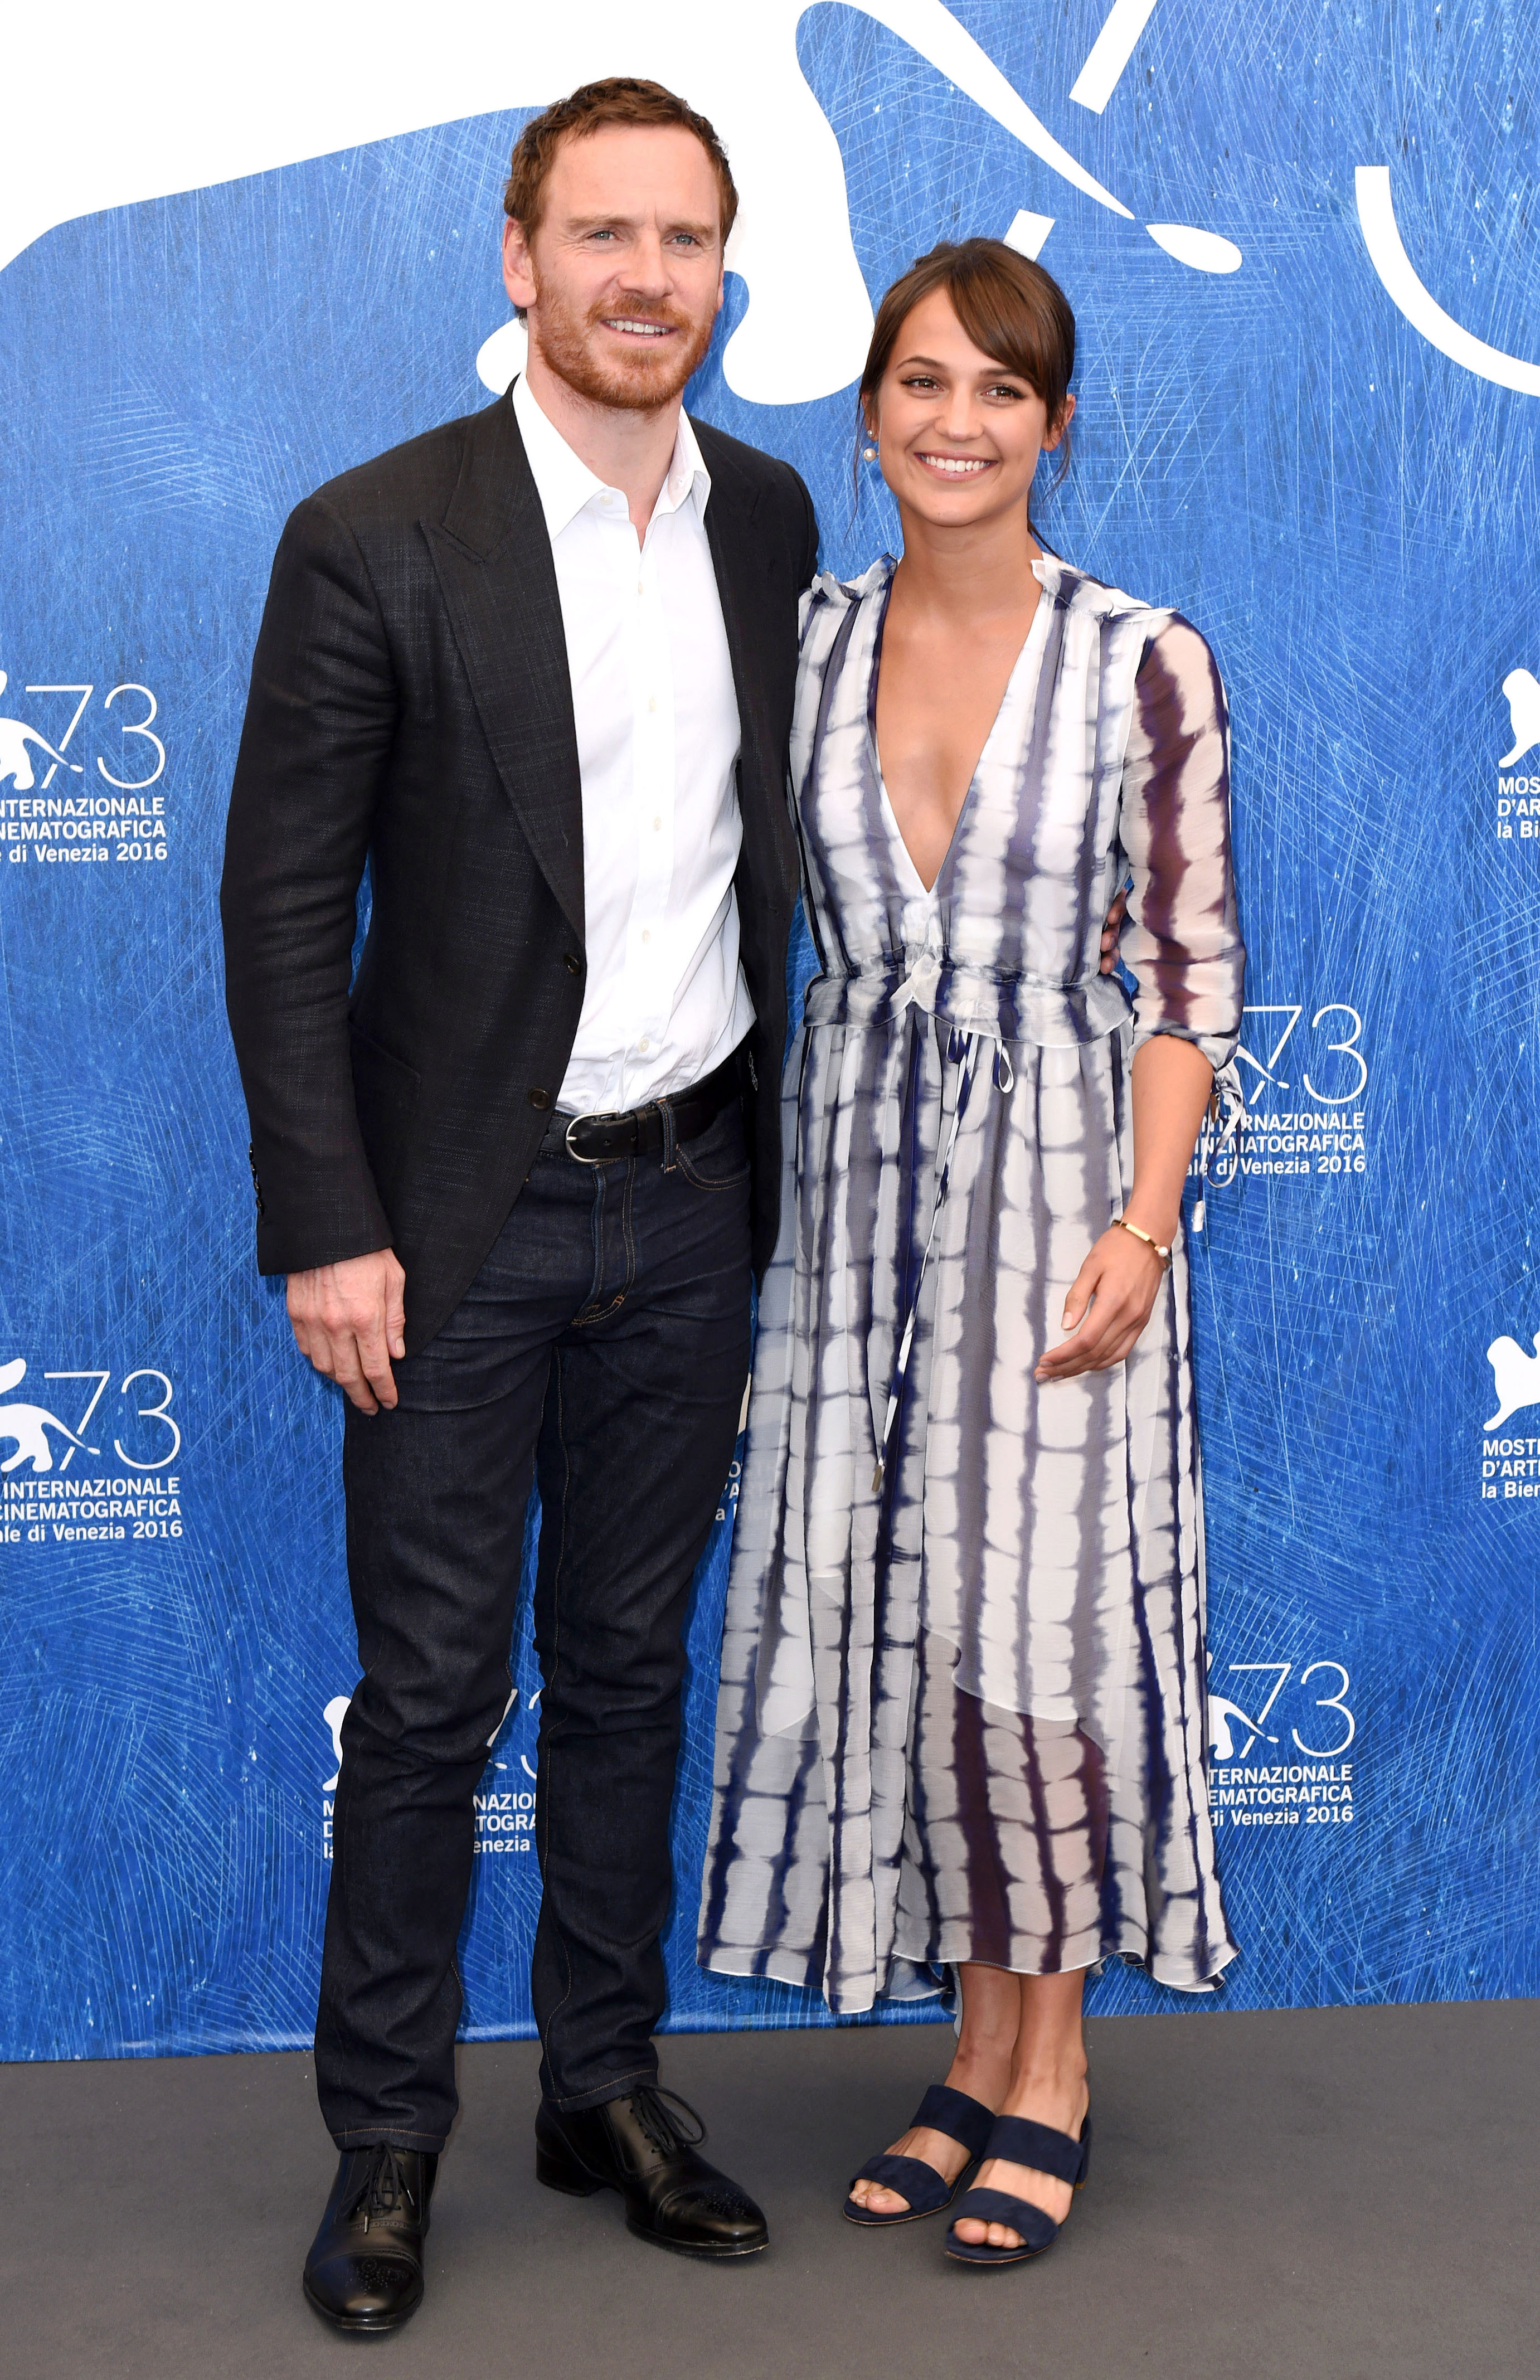 <p>Incredibly private couple <a href="https://www.wonderwall.com/celebrity/profiles/overview/alicia-vikander-1614.article">Alicia Vikander</a> and <a href="https://www.wonderwall.com/celebrity/profiles/overview/michael-fassbender-1446.article">Michael Fassbender</a> first "properly" met, they told "Entertainment Tonight," during 2014 rehearsals for their film "The Light Between Oceans." But while promoting the movie in 2016, Alicia revealed they'd actually shared a moment before that official introduction. "We had met at [the] Toronto Film Festival," she said, "on the dance floor." Added Michael: "I thought [I was a good dancer] until she started dancing and then I felt like I had two left feet." He also admitted that their chemistry "was sort of there from the beginning." The pair <a href="http://www.wonderwall.com/celebrity/michael-fassbender-and-alicia-vikander-say-i-do-plus-more-news-3010226.gallery">married</a> in October 2017.</p>